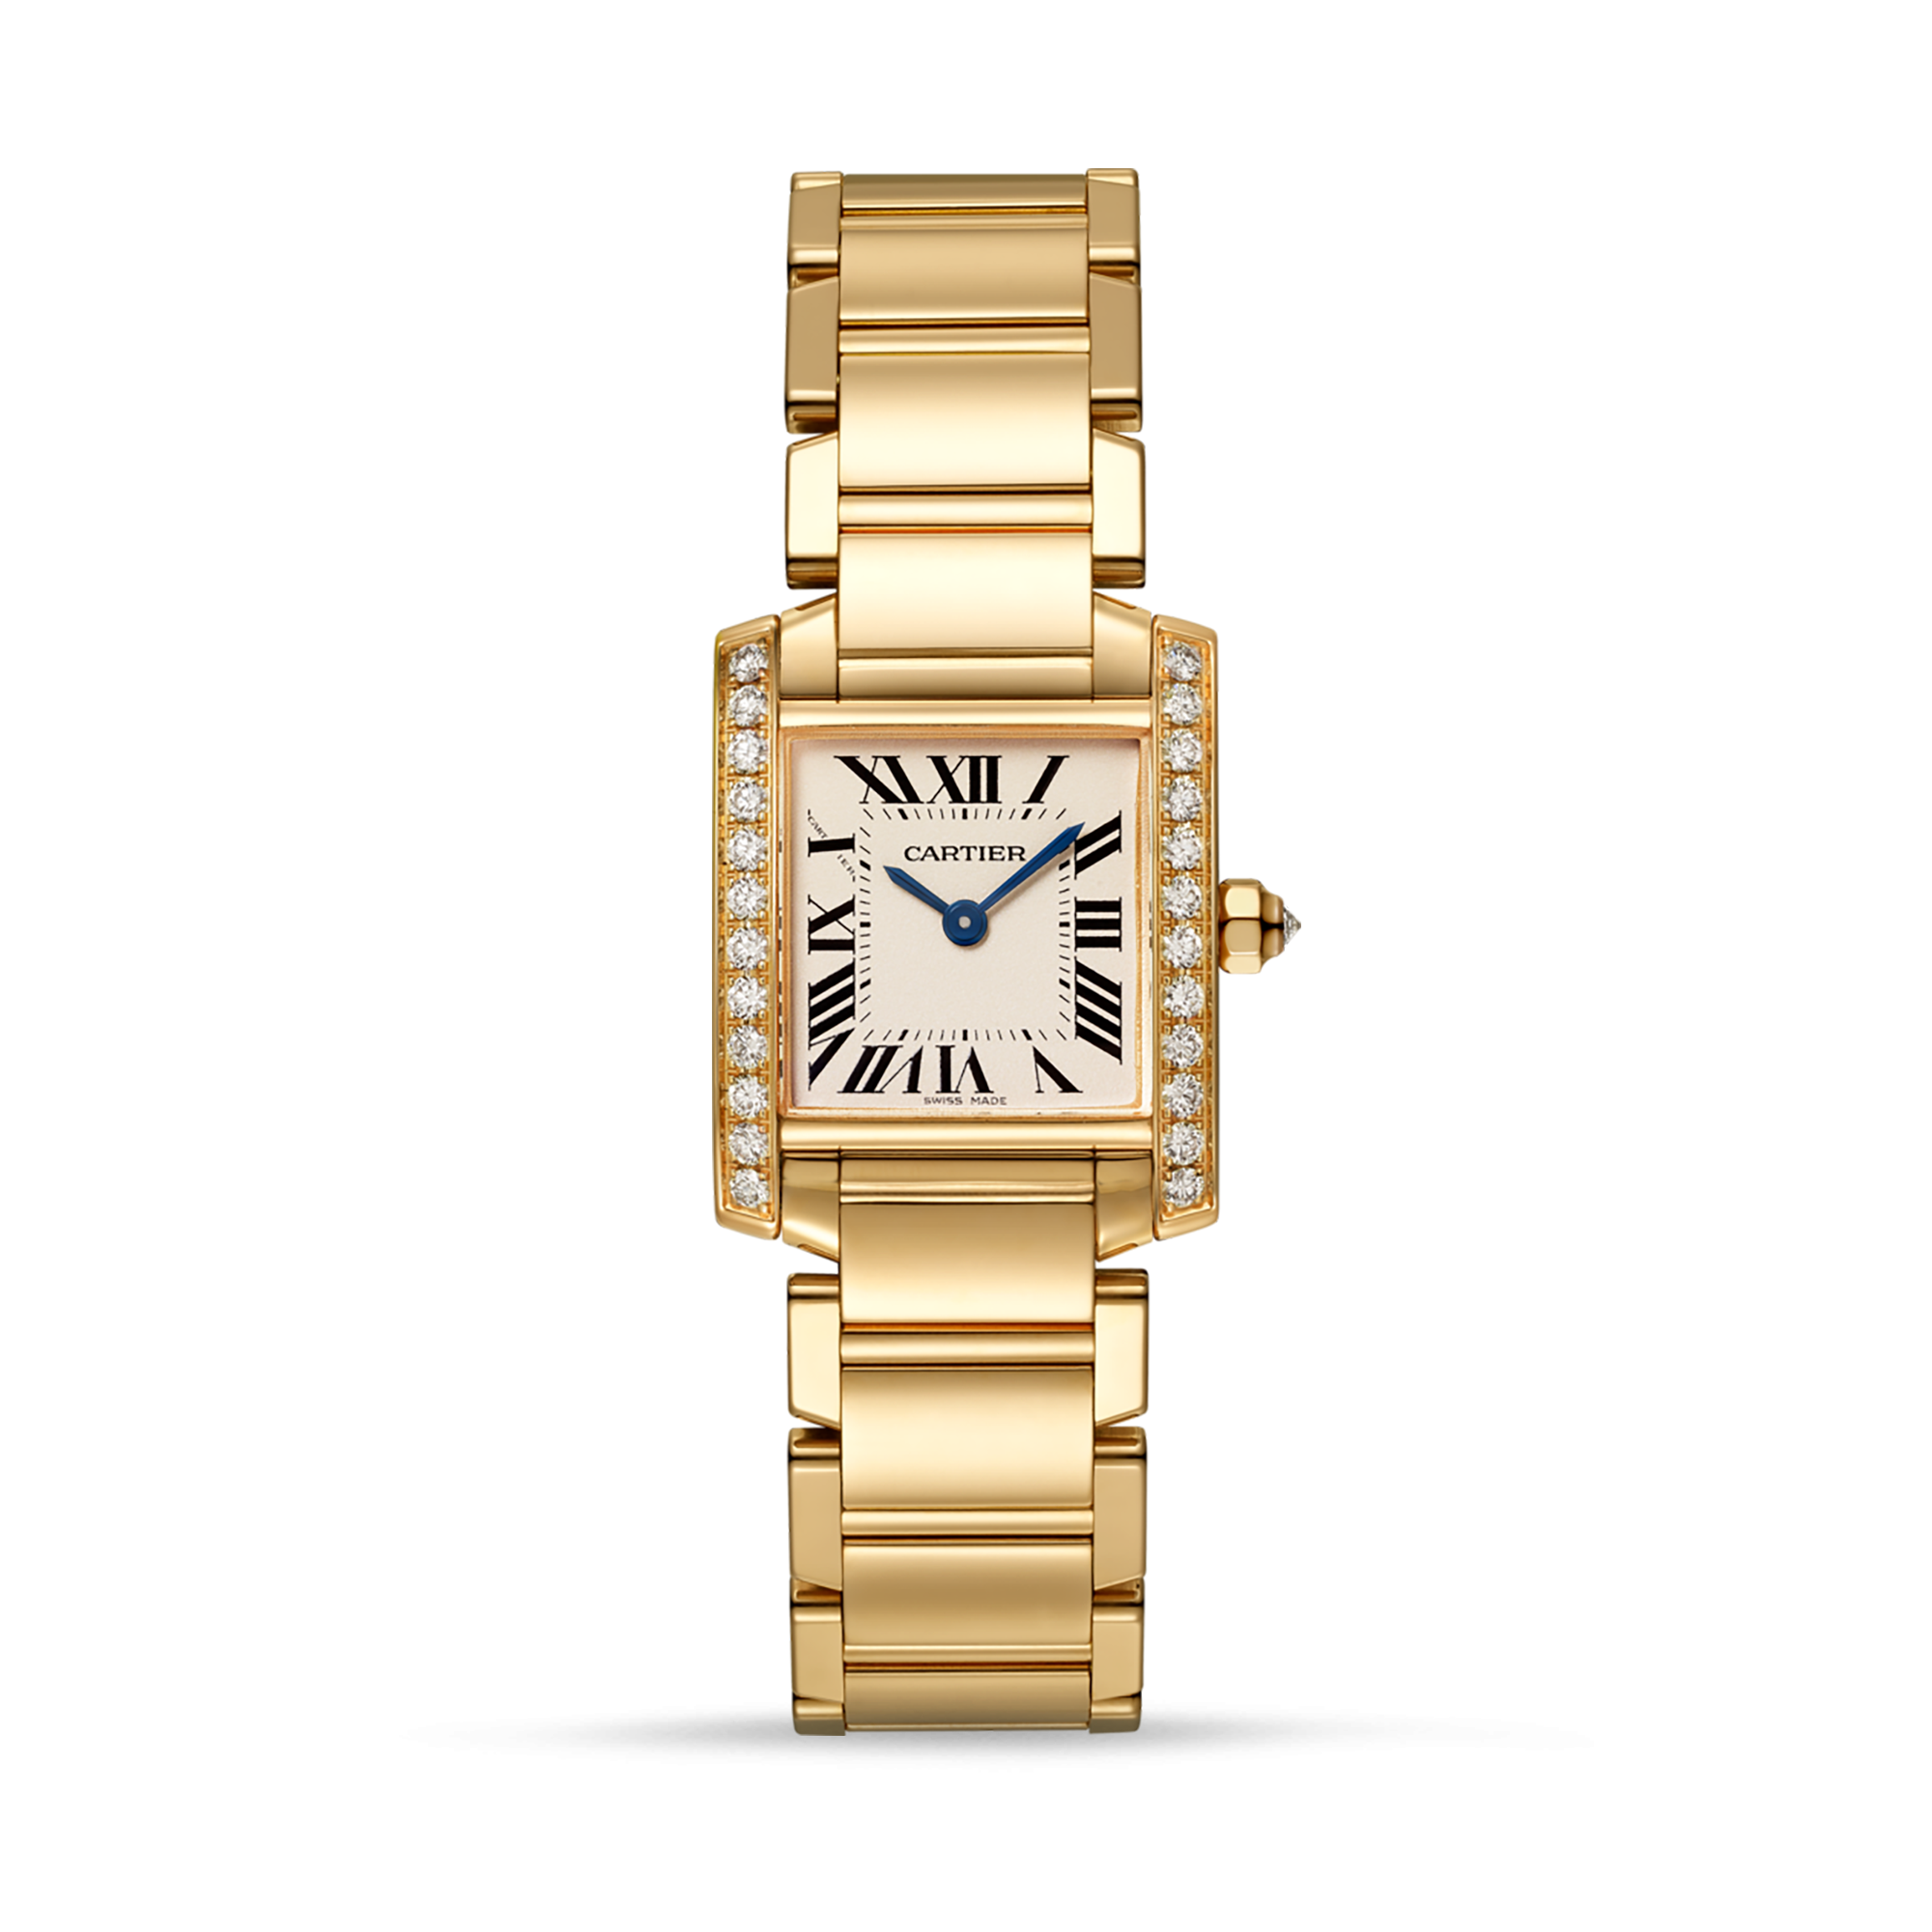 Cartier watches: view the entire collection